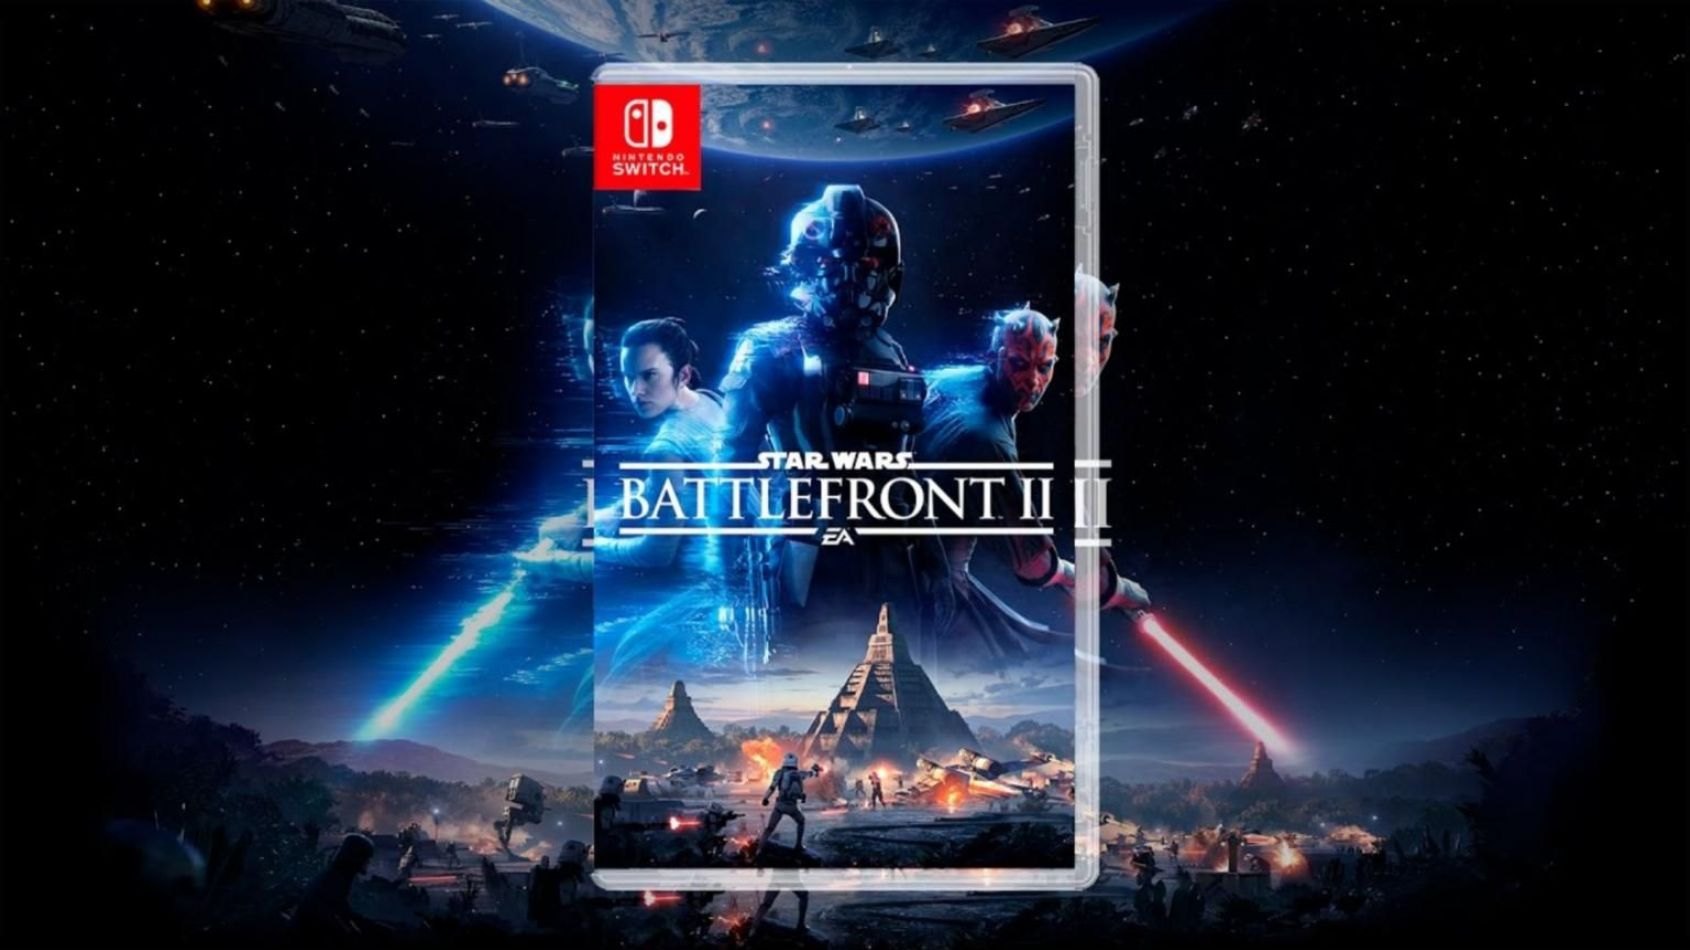 Battlefront classic collection switch